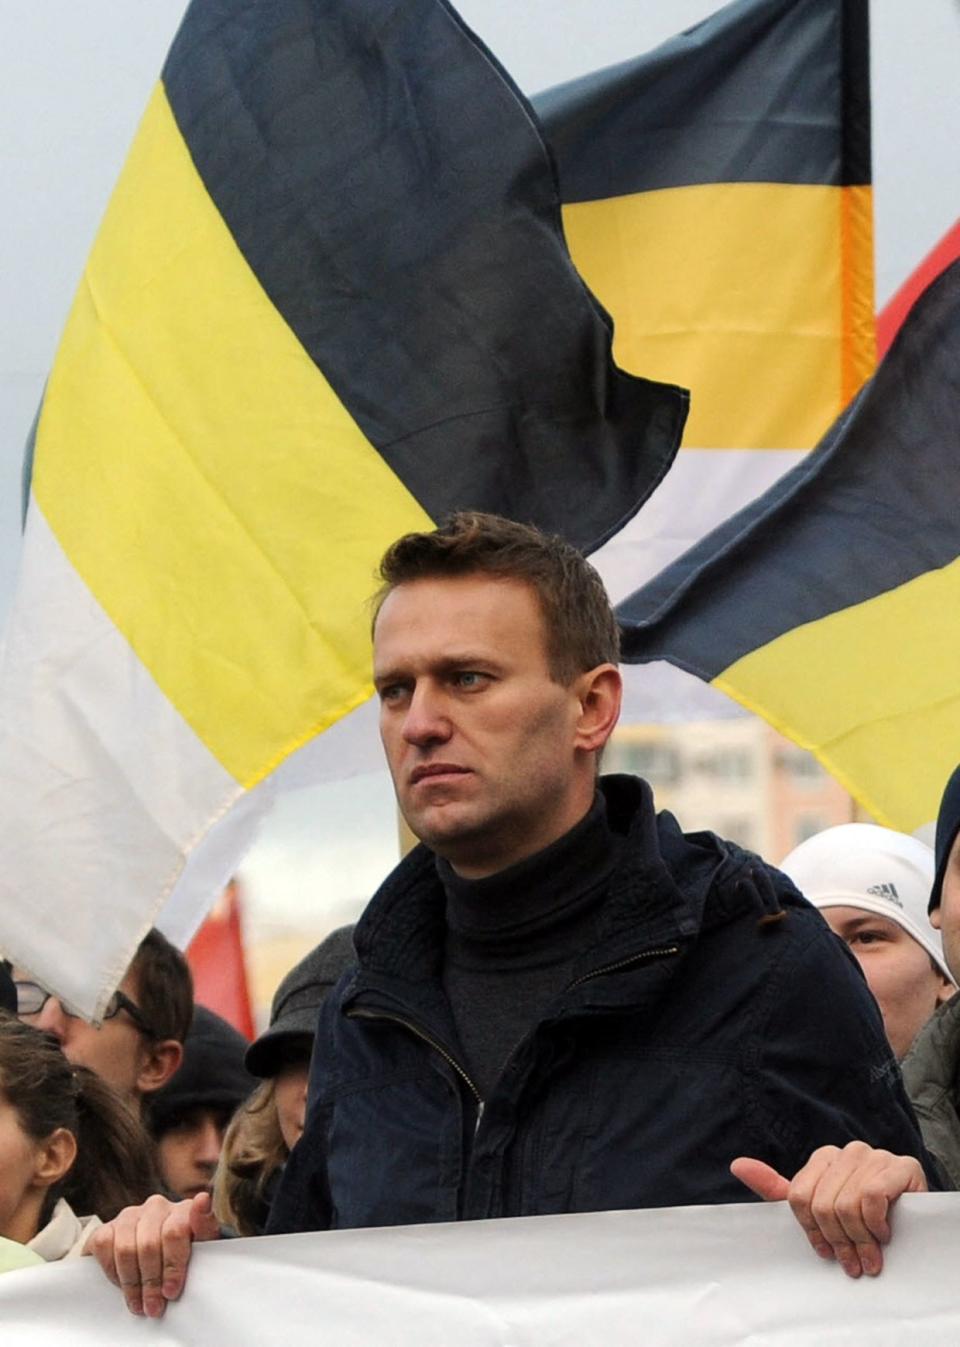 A picture taken on November 4, 2011, in the southeastern outskirts of Moscow shows influential blogger Alexei Navalny taking part in the so-called "Russian March," which marks the National Unity Day. "The main event is Navalny," said Alexander Morozov, a political analyst and director of the Moscow Centre of Media Studies. (Andrey Smirnov /AFP via Getty Images)